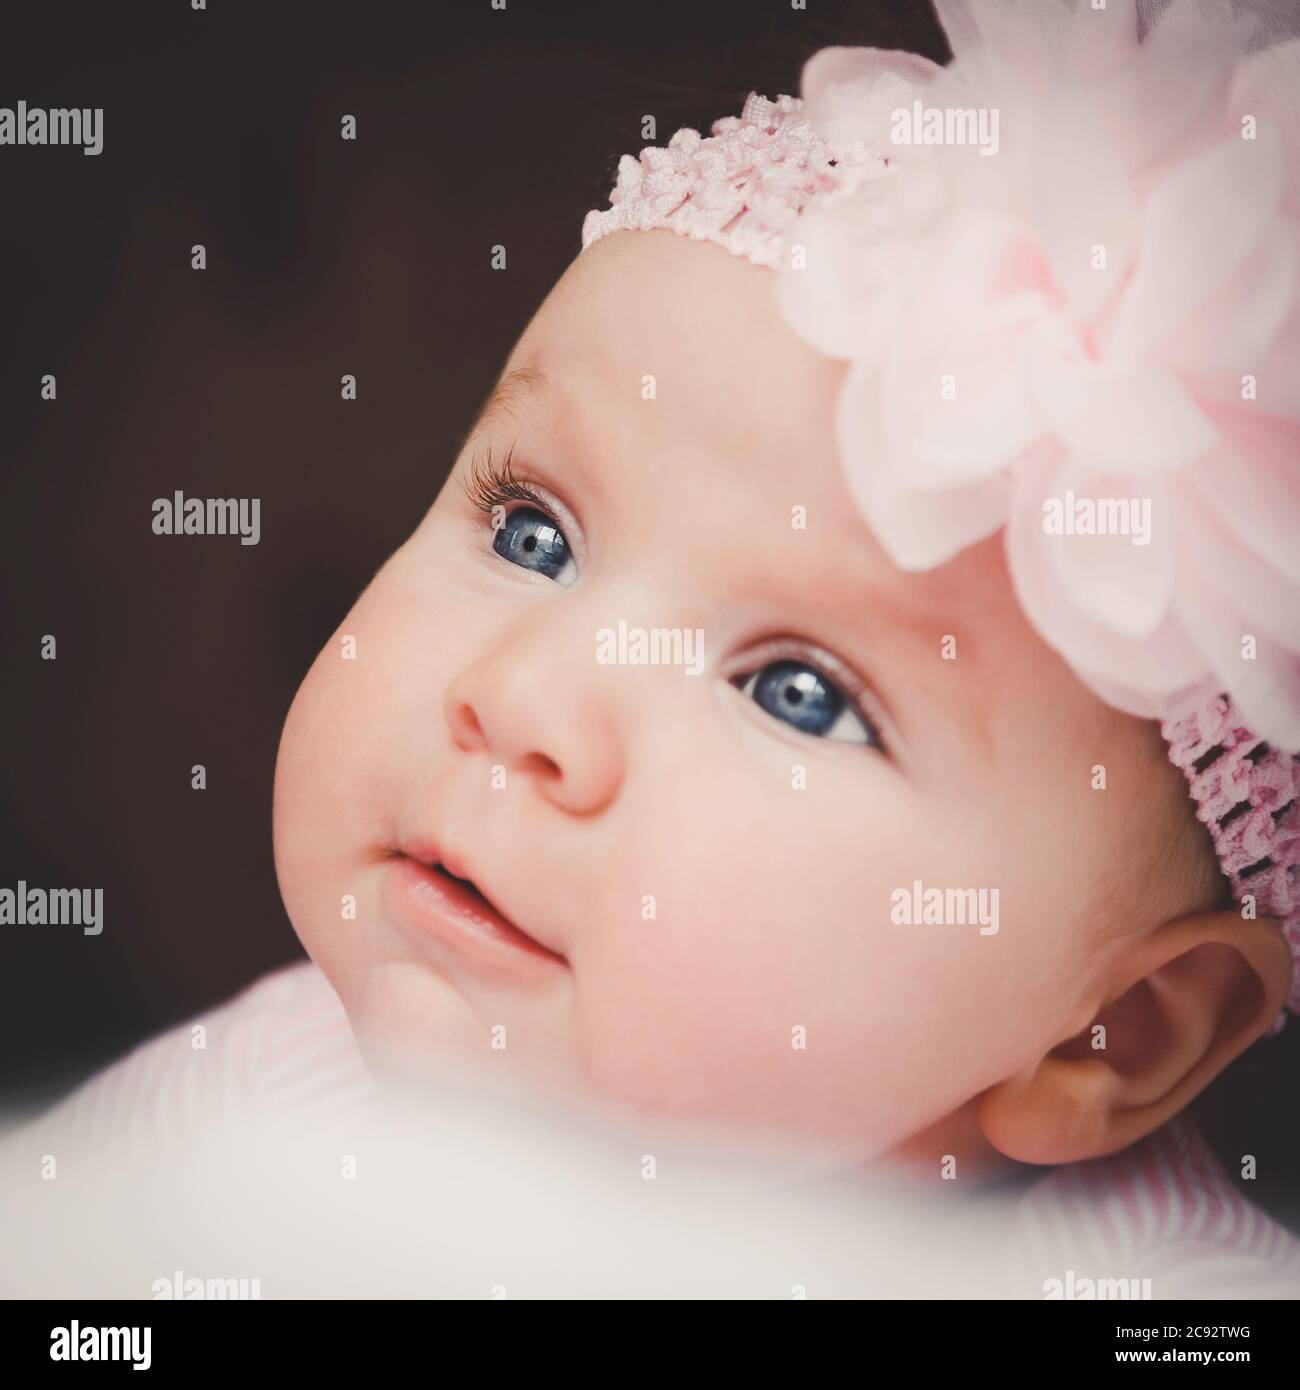 Close-up portrait of cute 3 months old smiling baby girl in pink. Big open eyes. Healthy little kid shortly after birth. Stock Photo